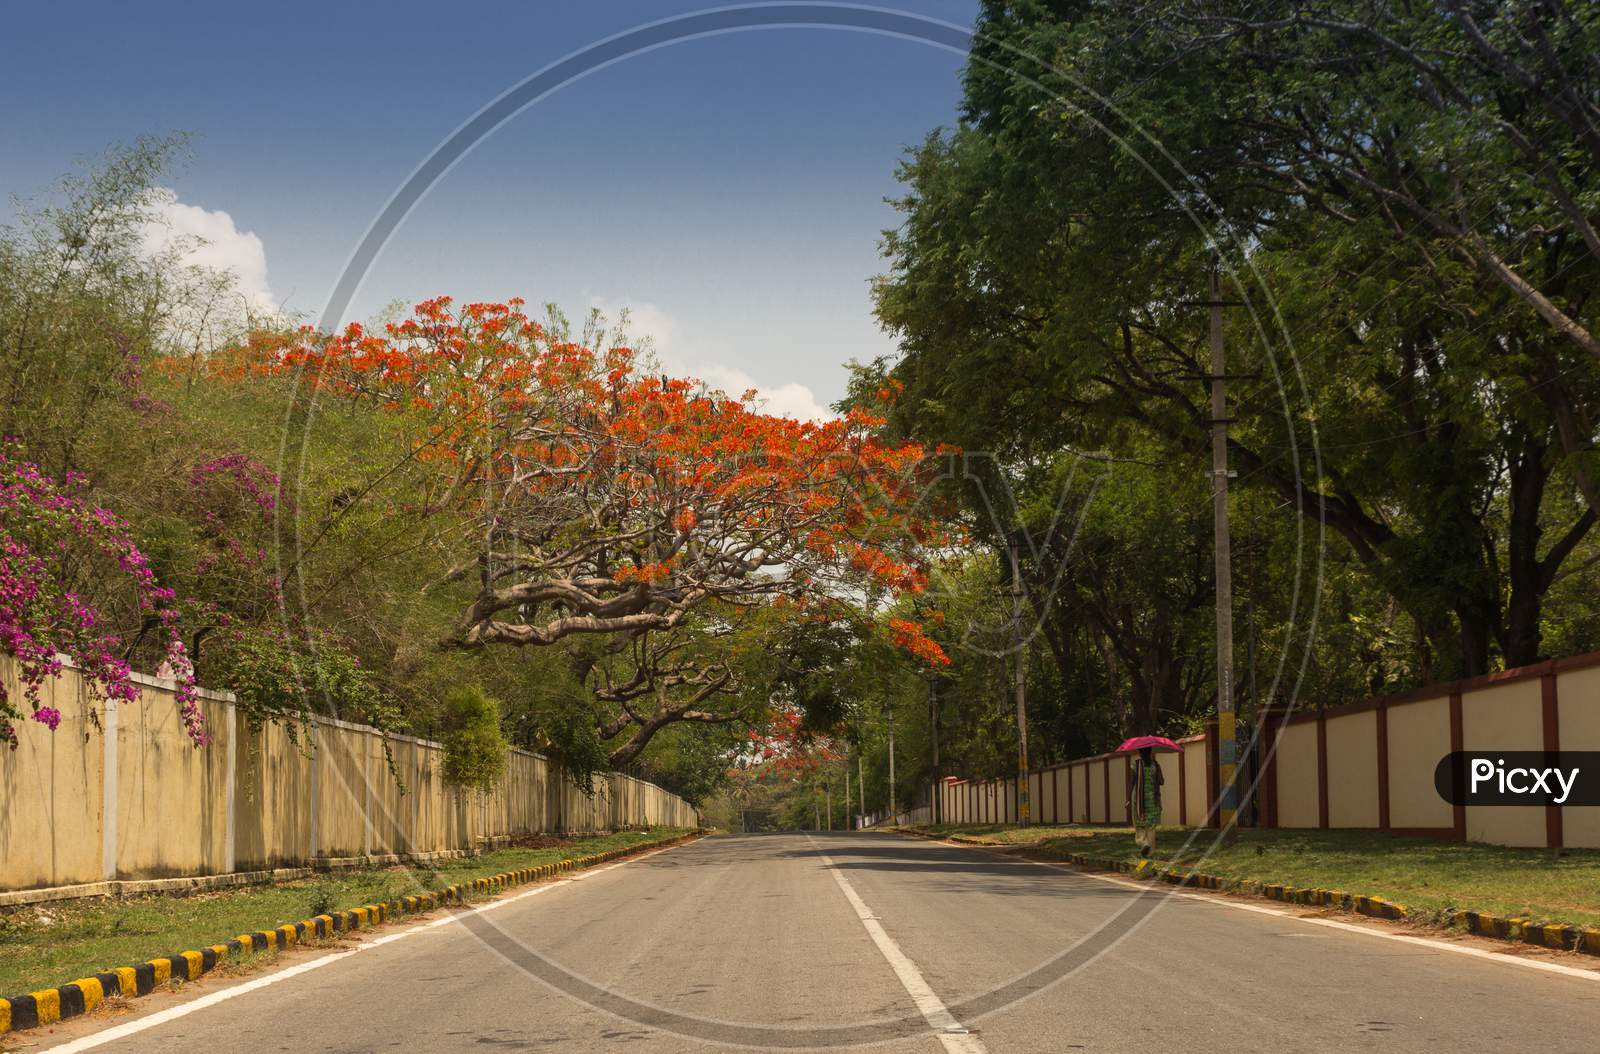 An awesome view of Irani road with Gul Mohar trees in Mysore/India.